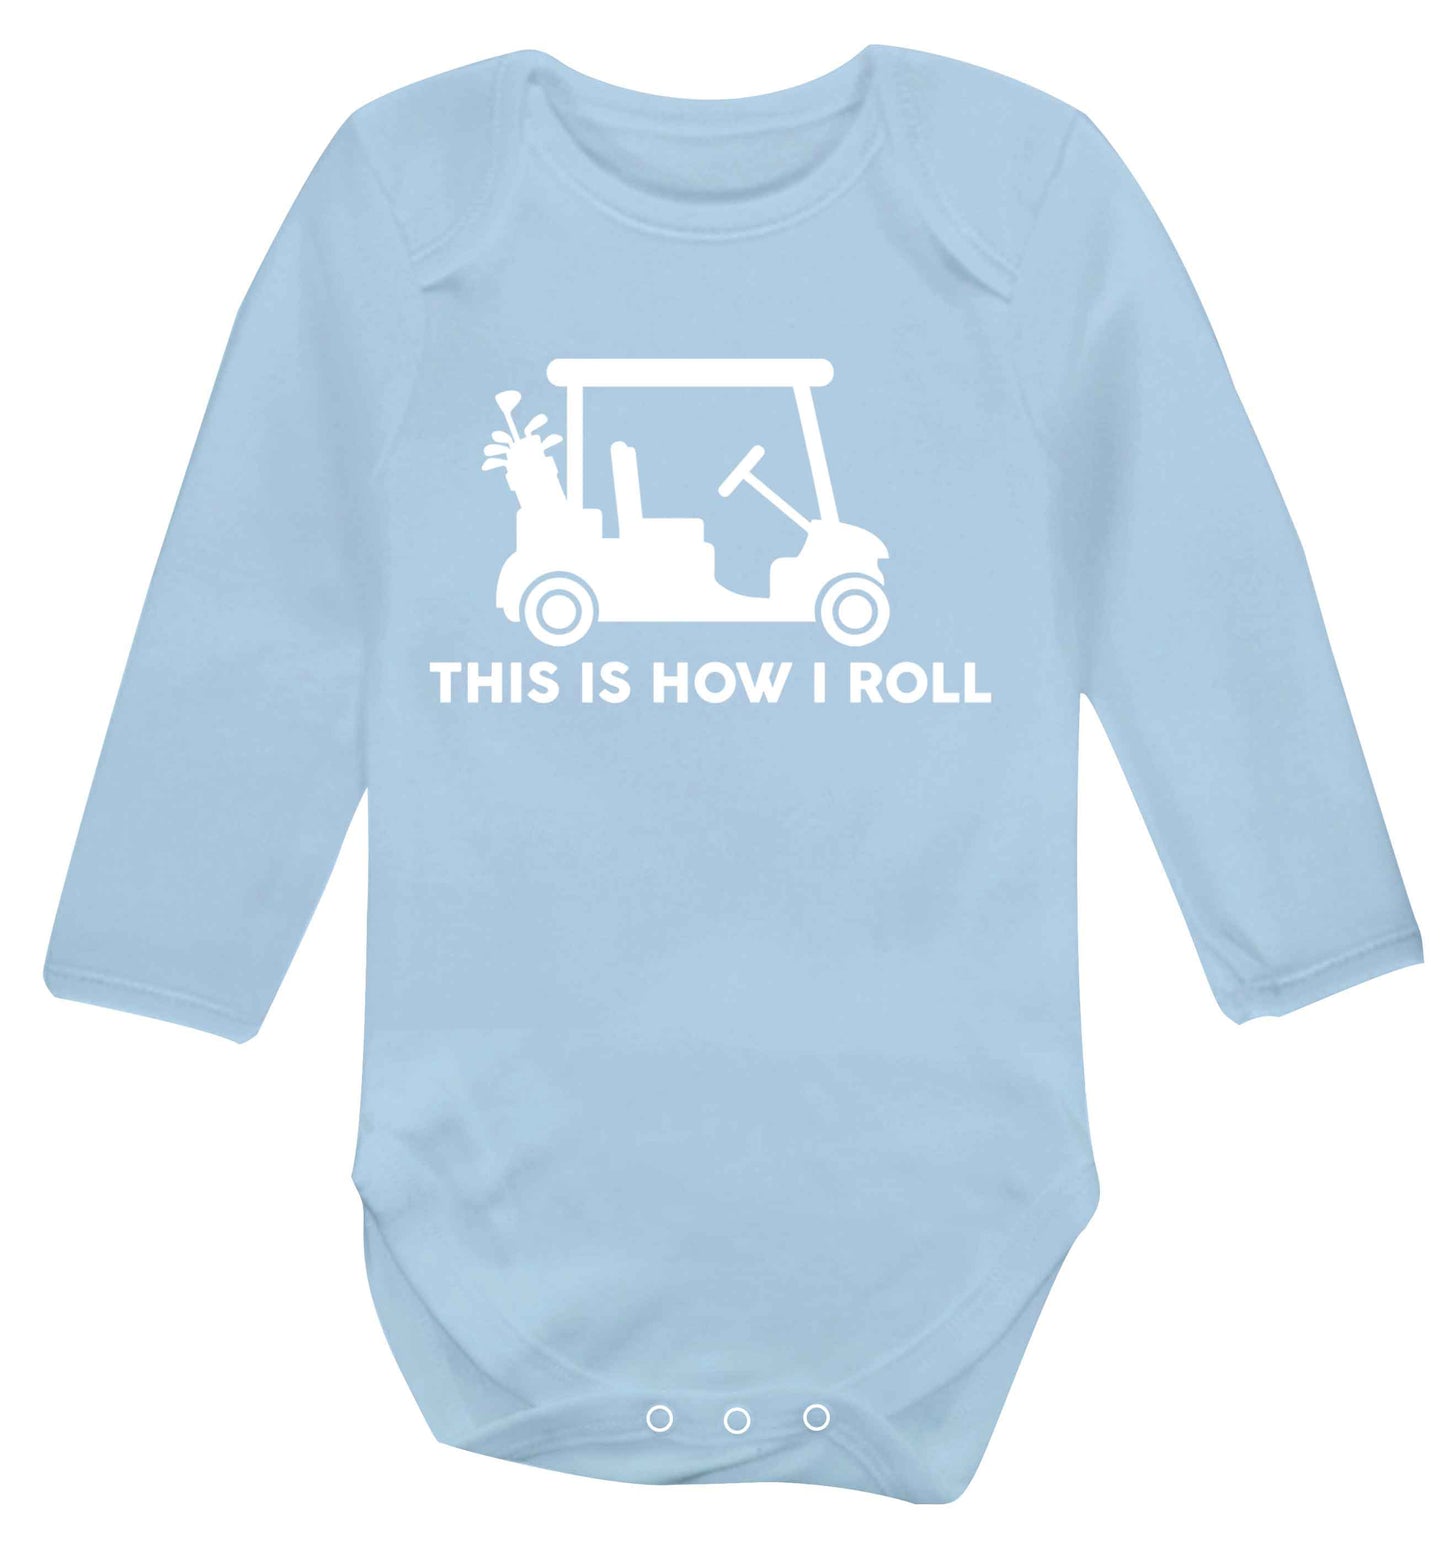 This is how I roll golf cart Baby Vest long sleeved pale blue 6-12 months